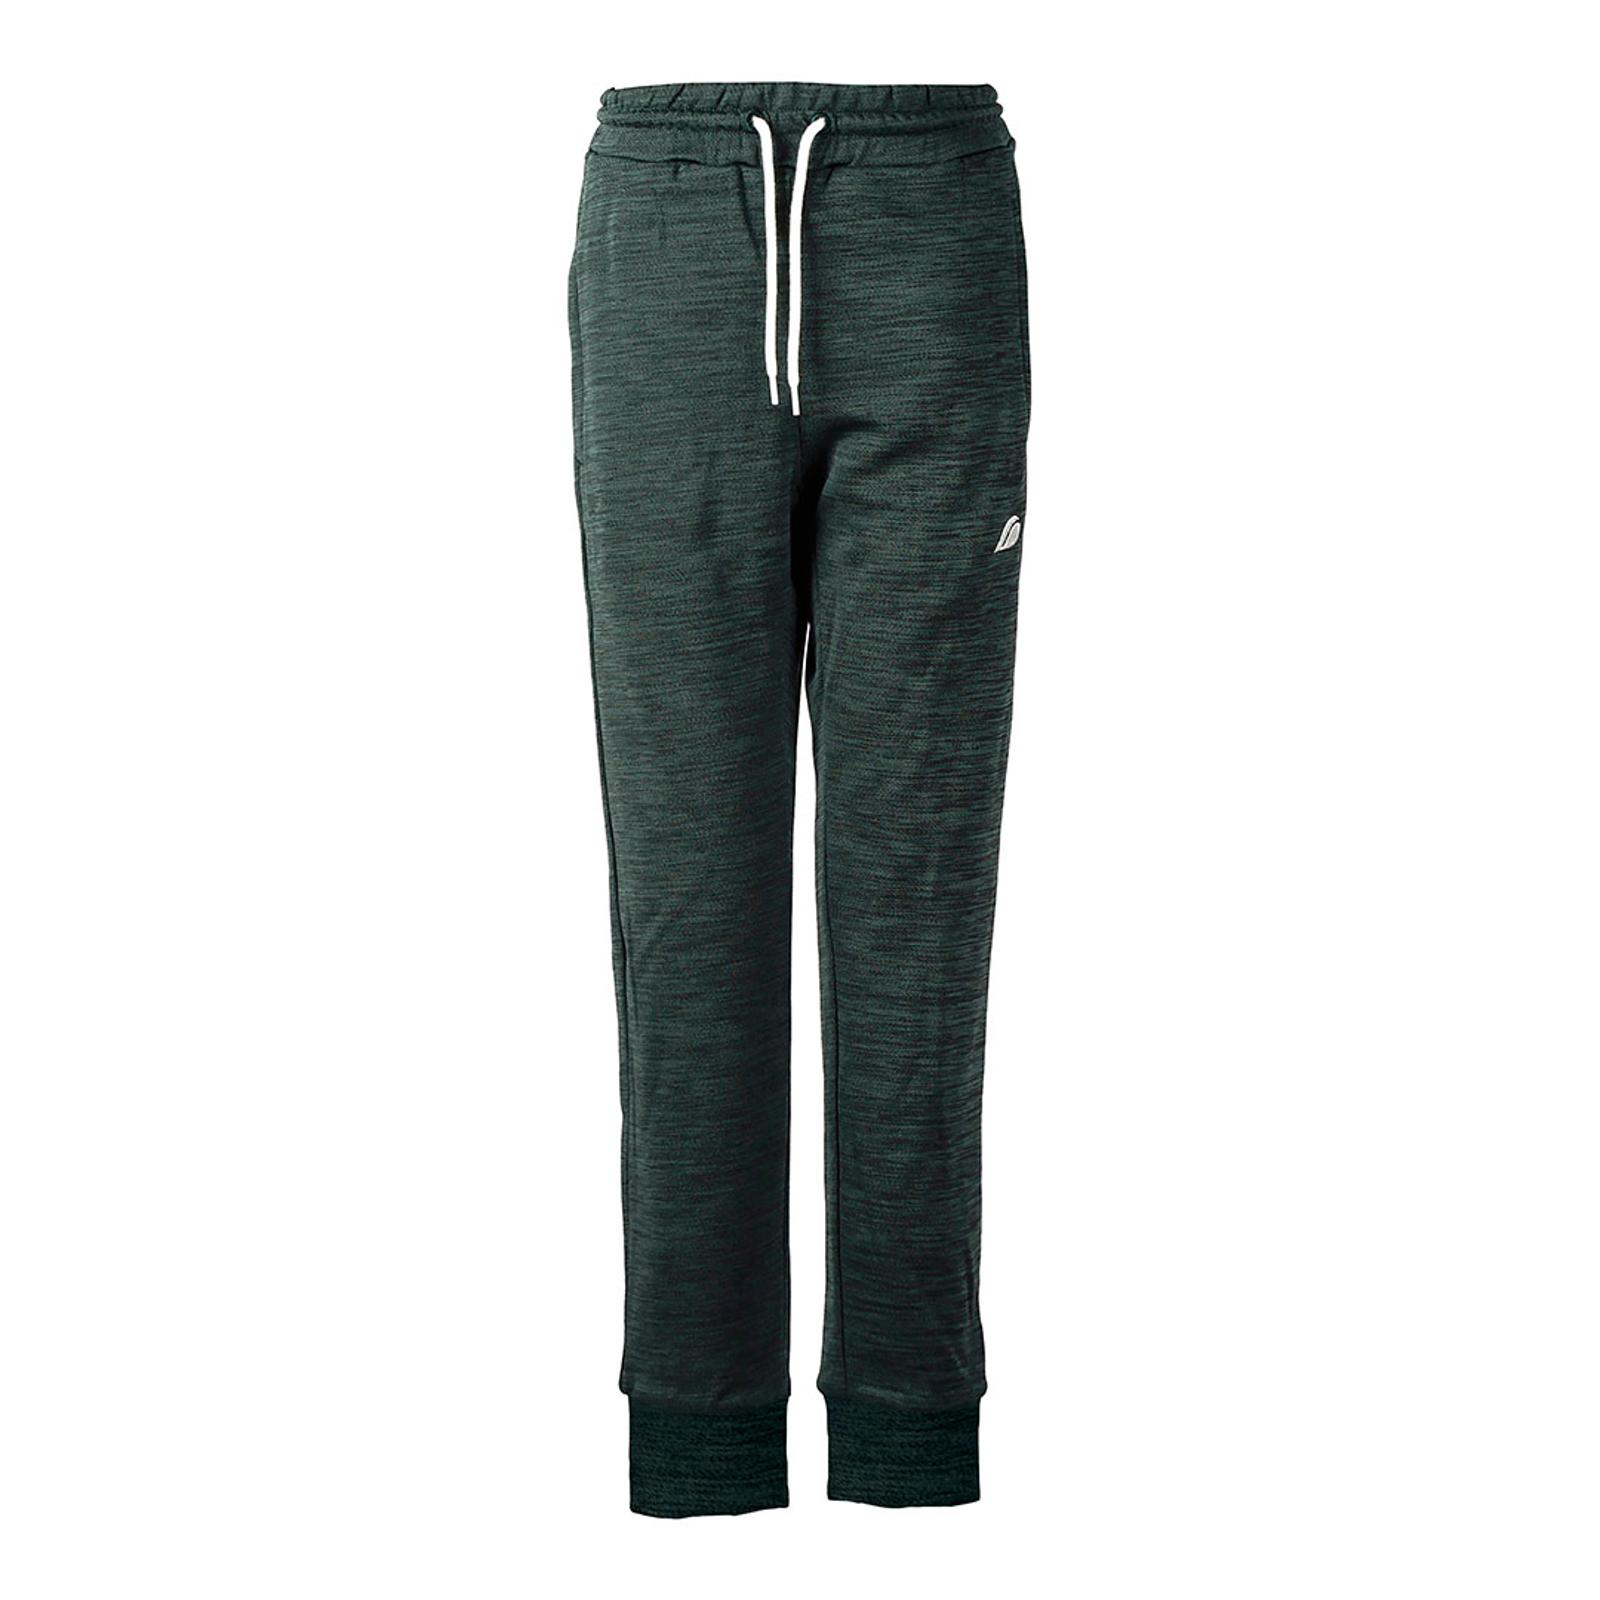 North Sea Chris Youth Trousers - BrandAlley